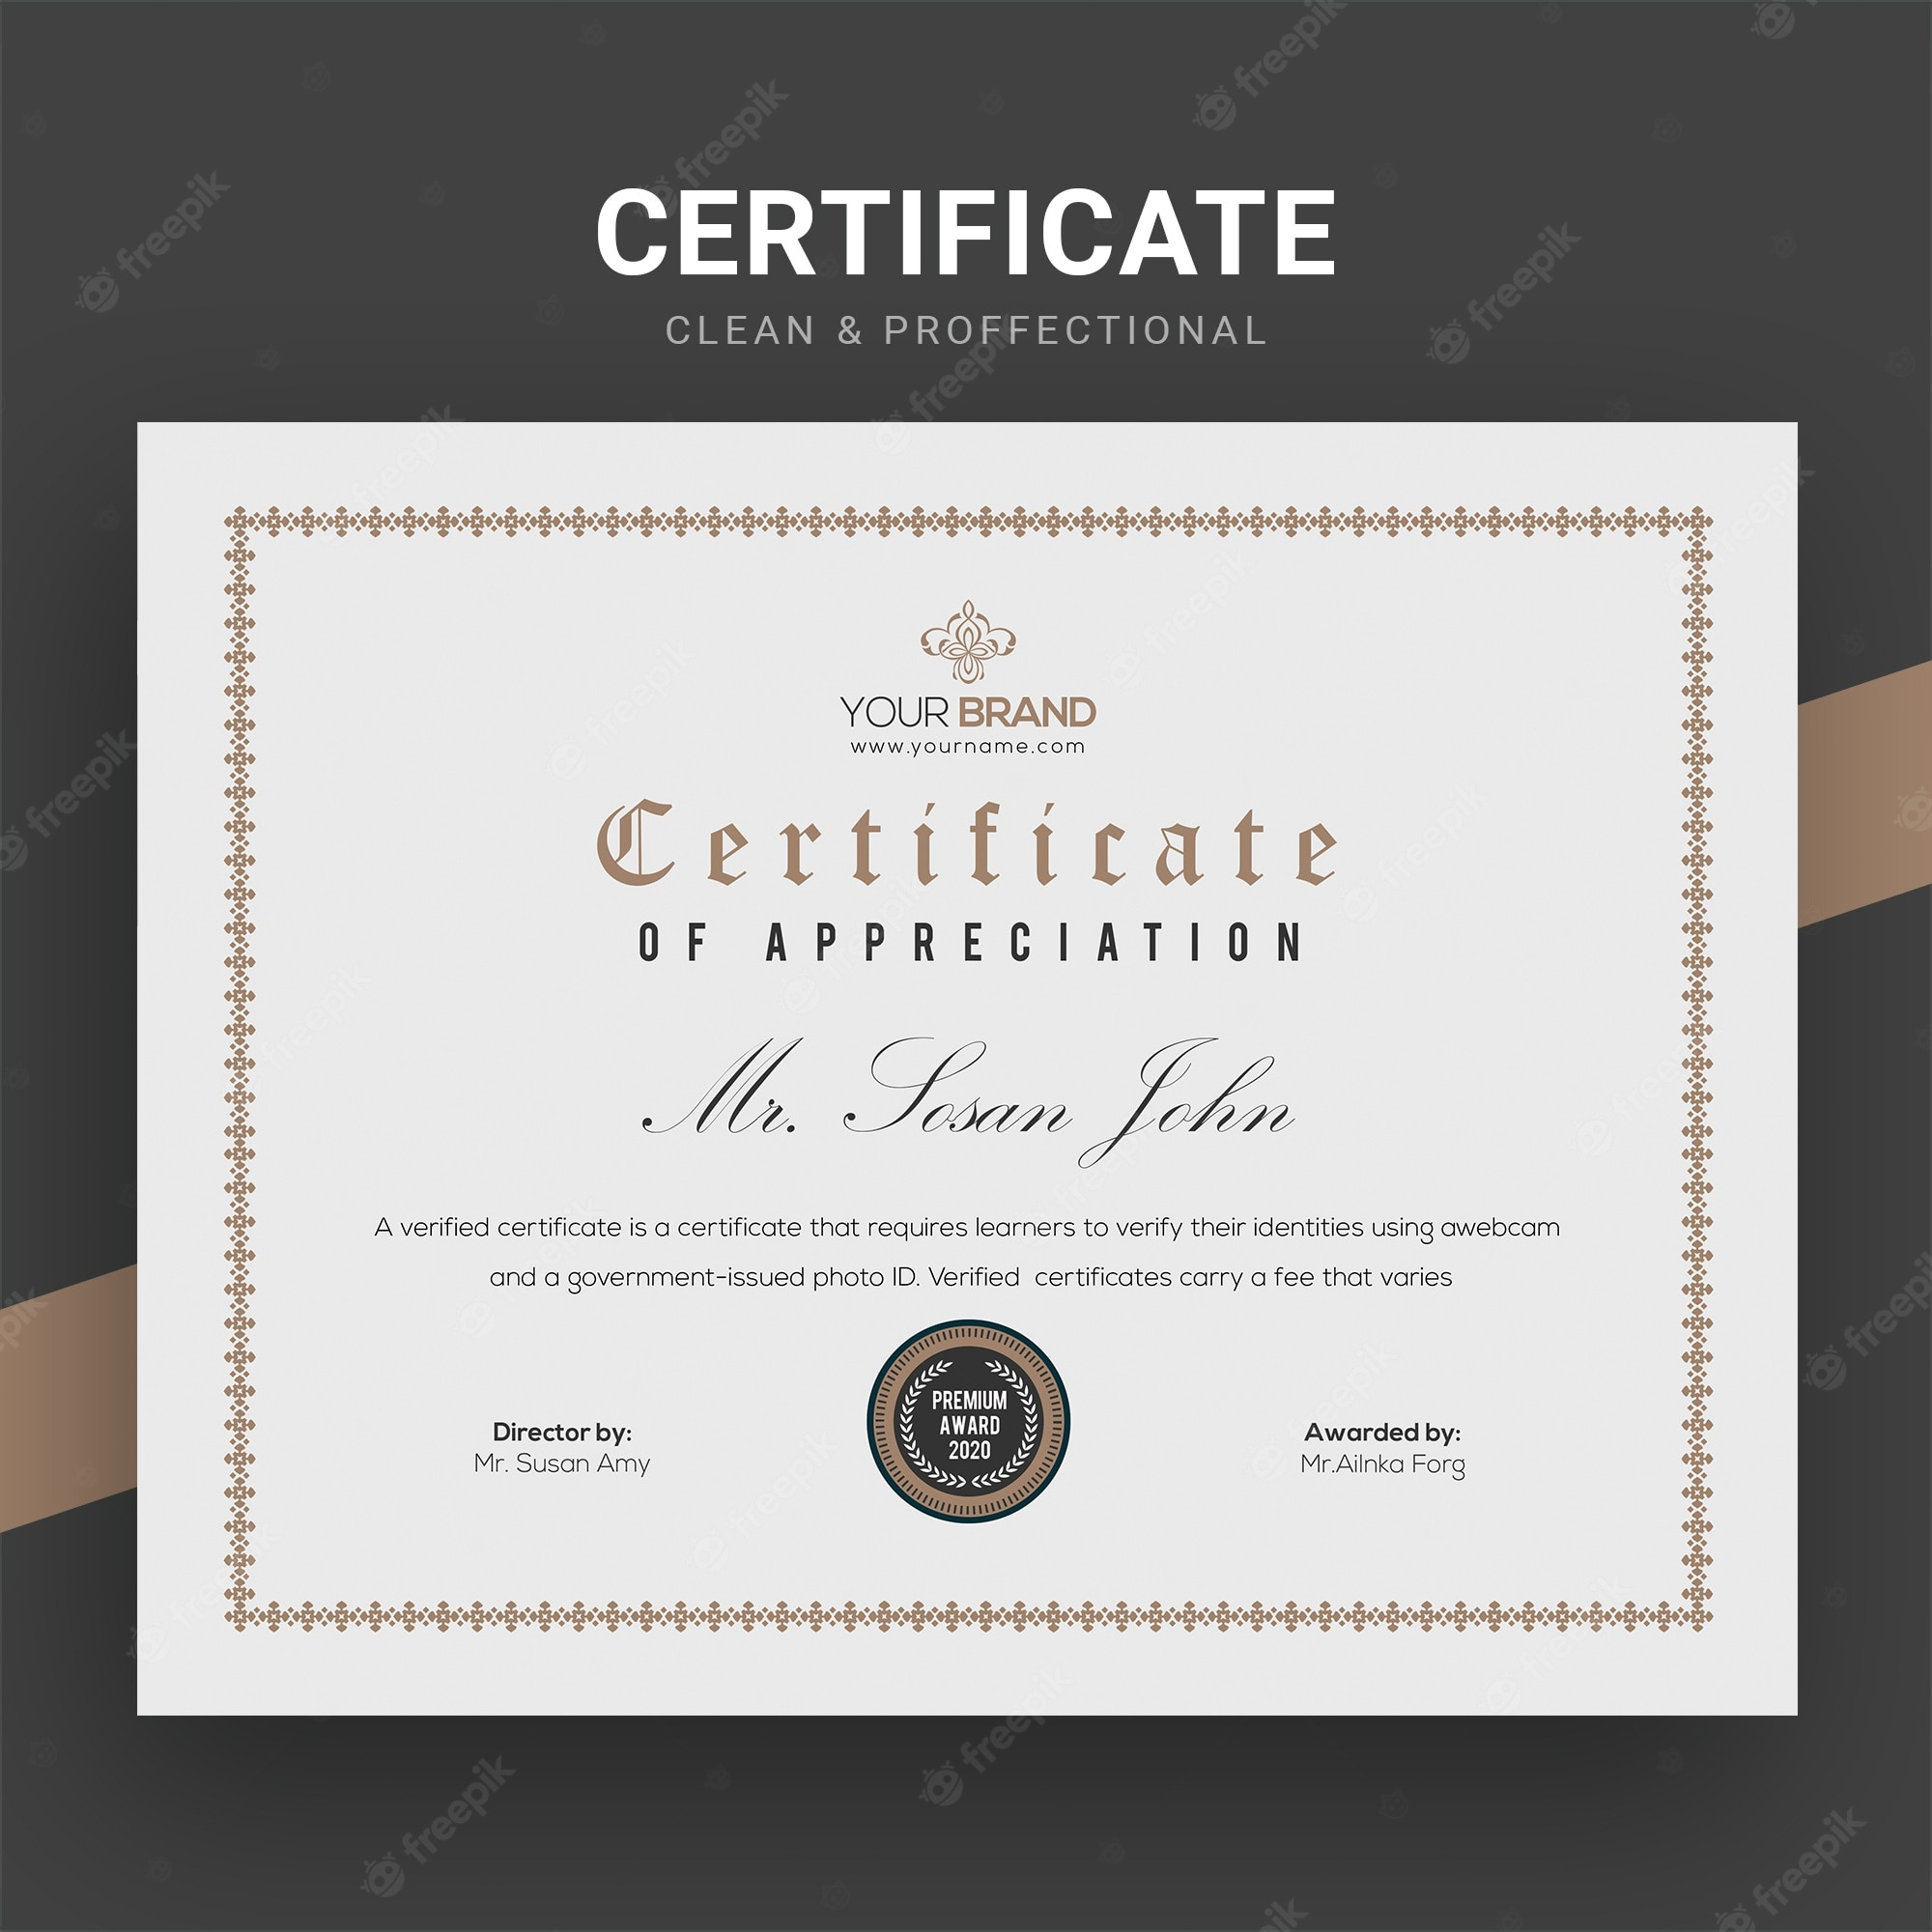 Certificate Indesign Images  Free Vectors, Stock Photos & PSD With Indesign Certificate Template